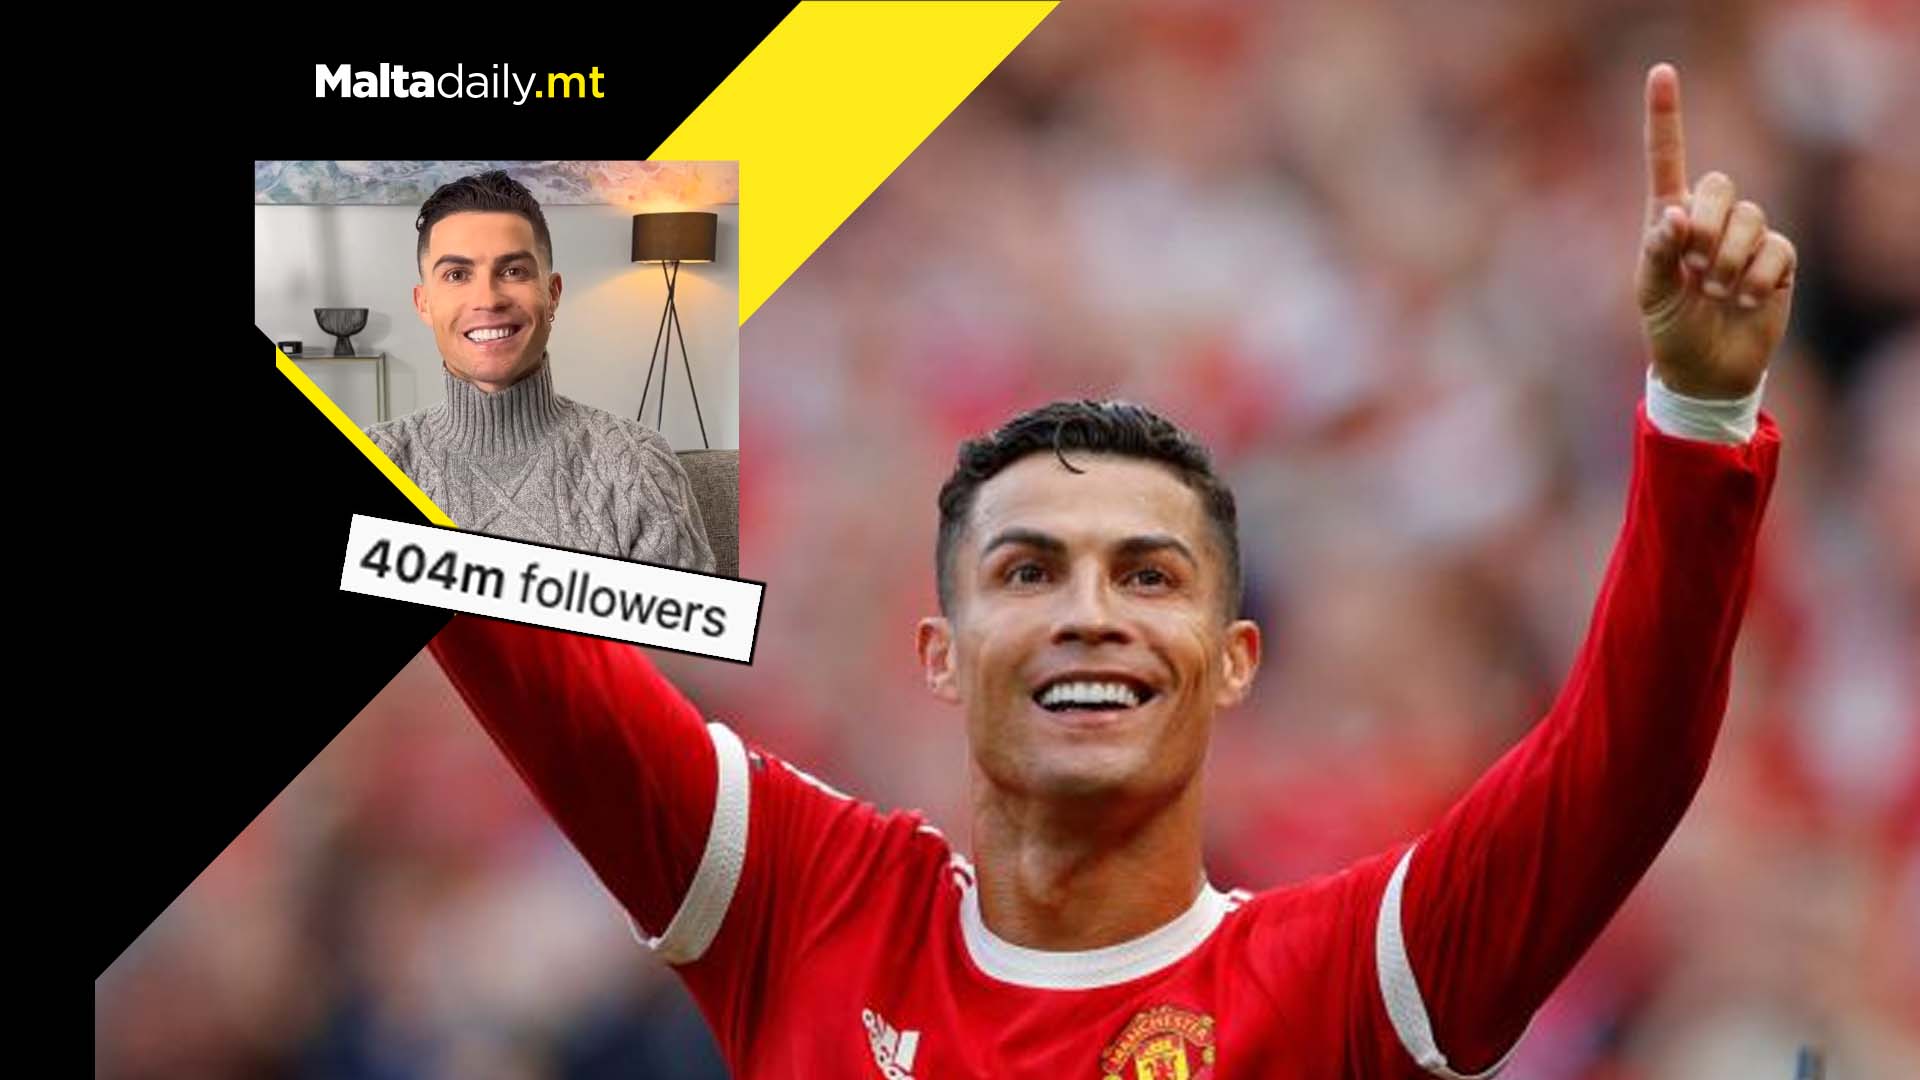 Cristiano Ronaldo celebrates being first person to reach 404 million followers